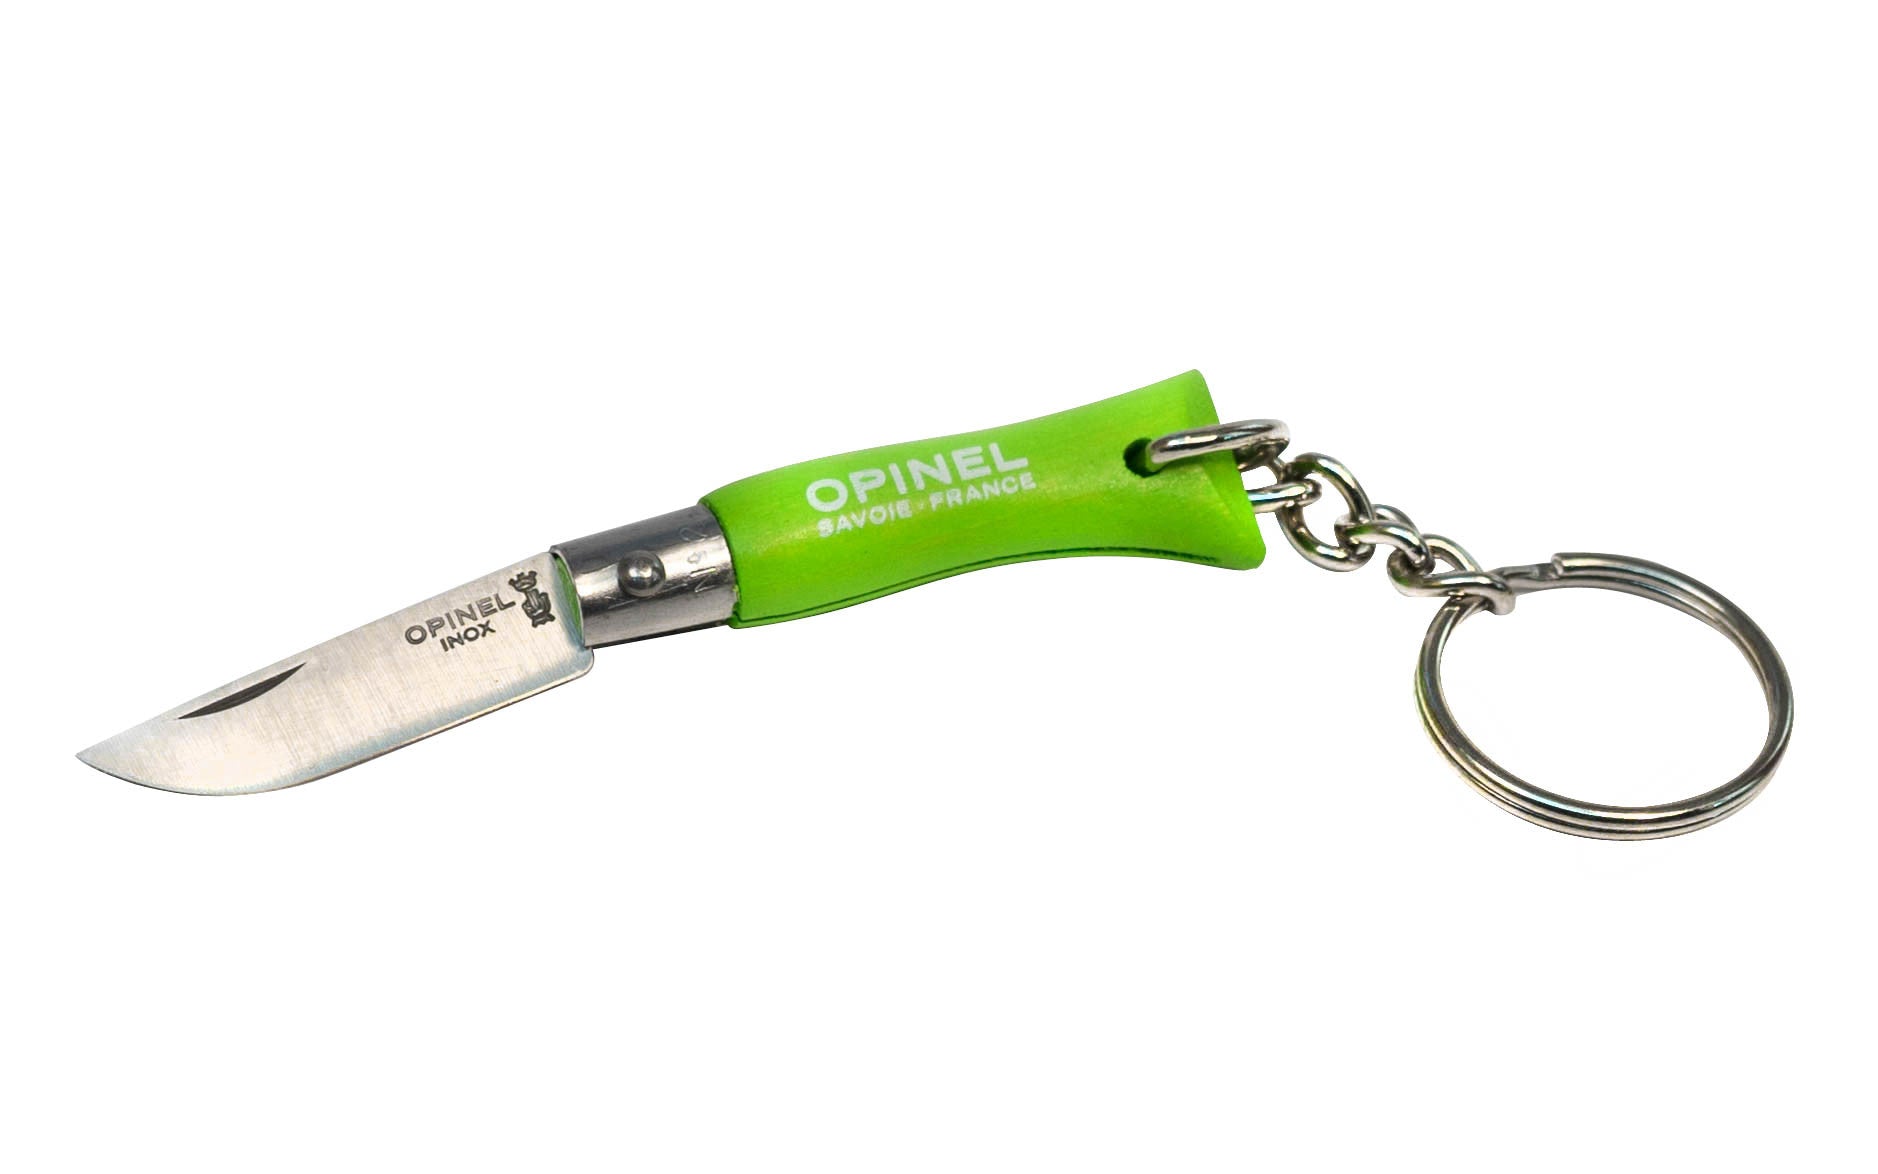 Opinel Mini Stainless Steel Knife with Keychain ~ "Apple Green" Color ~ Mini No. 2 stainless model ~ Foldable blade ~ Made of 12c27 Sandvik stainless steel~ Painted beechwood handle ~ Sturdy keychain & ring attached